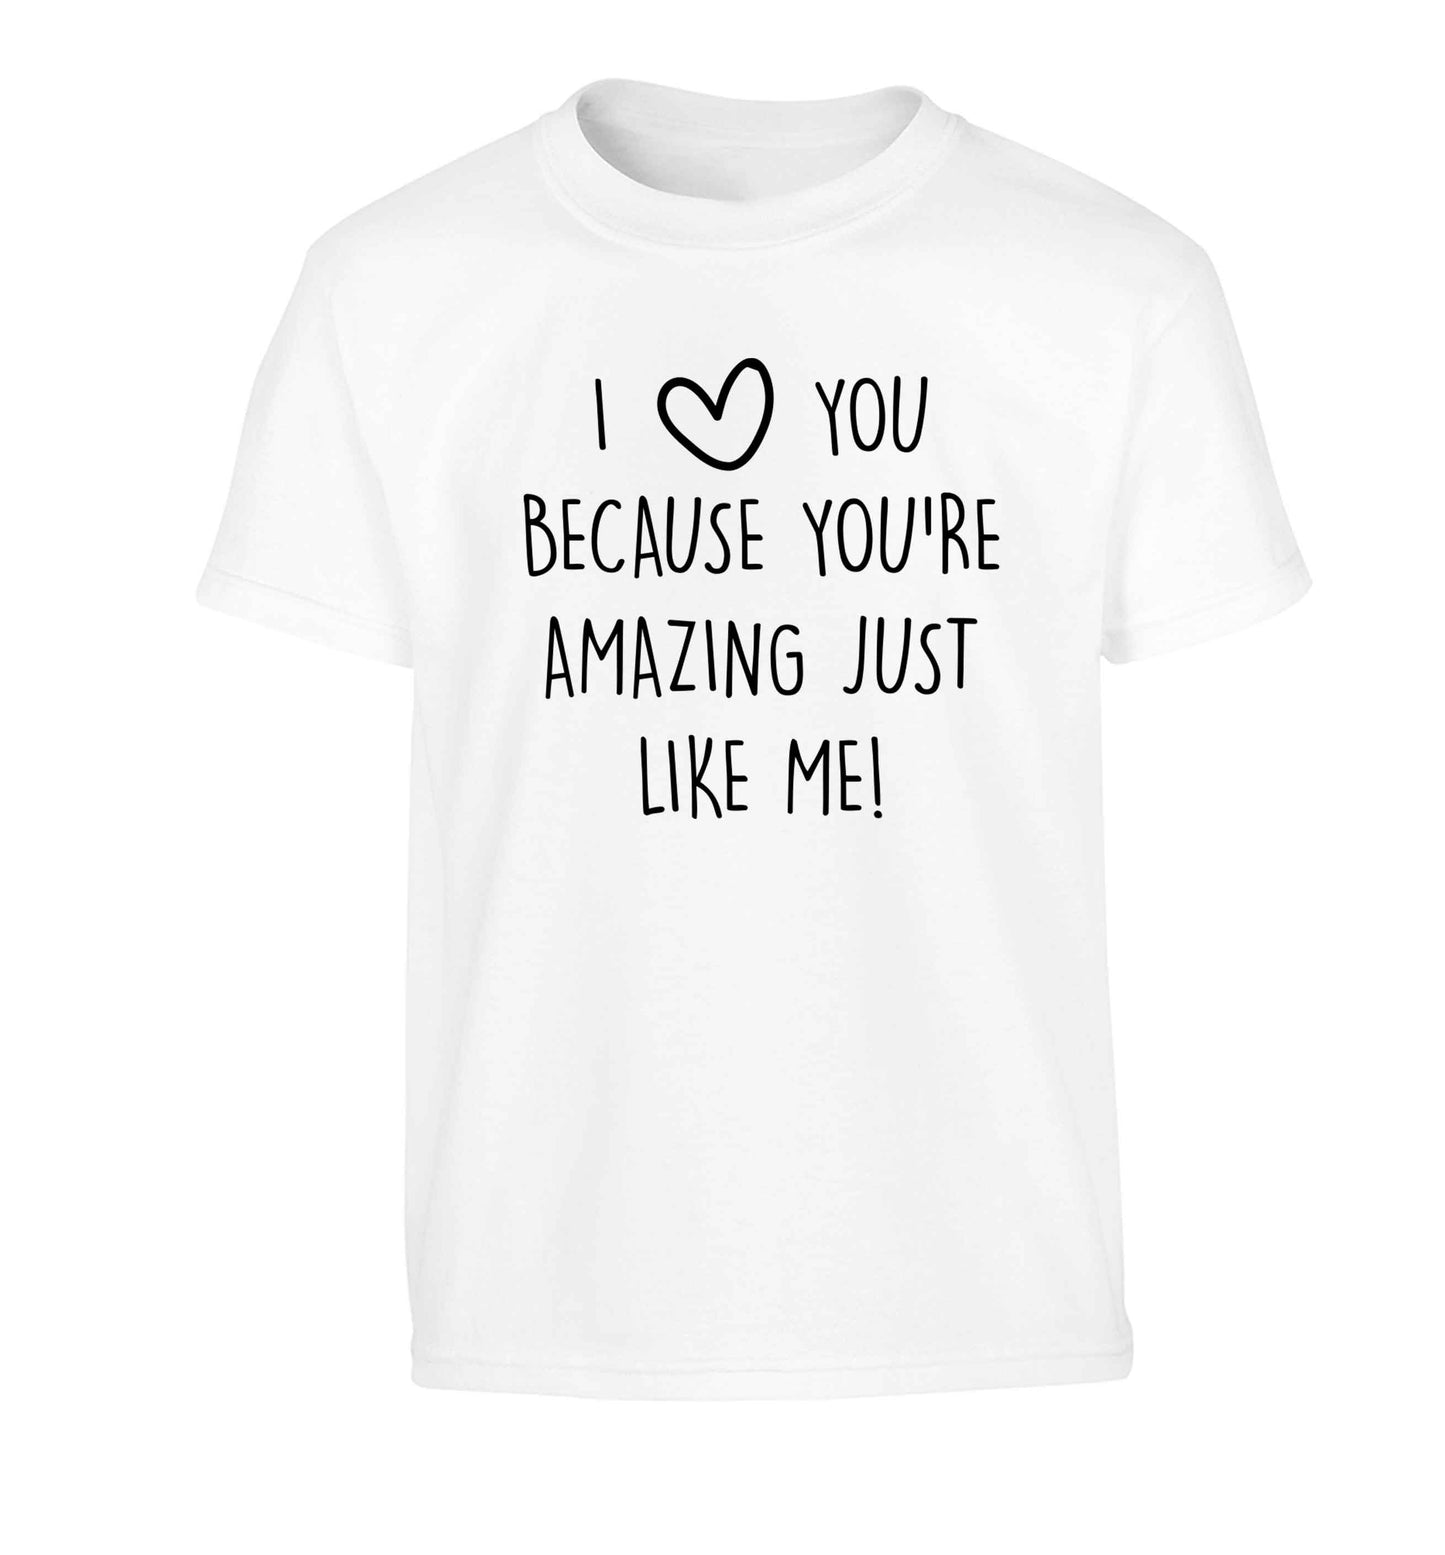 I love you because you're amazing just like me Children's white Tshirt 12-13 Years